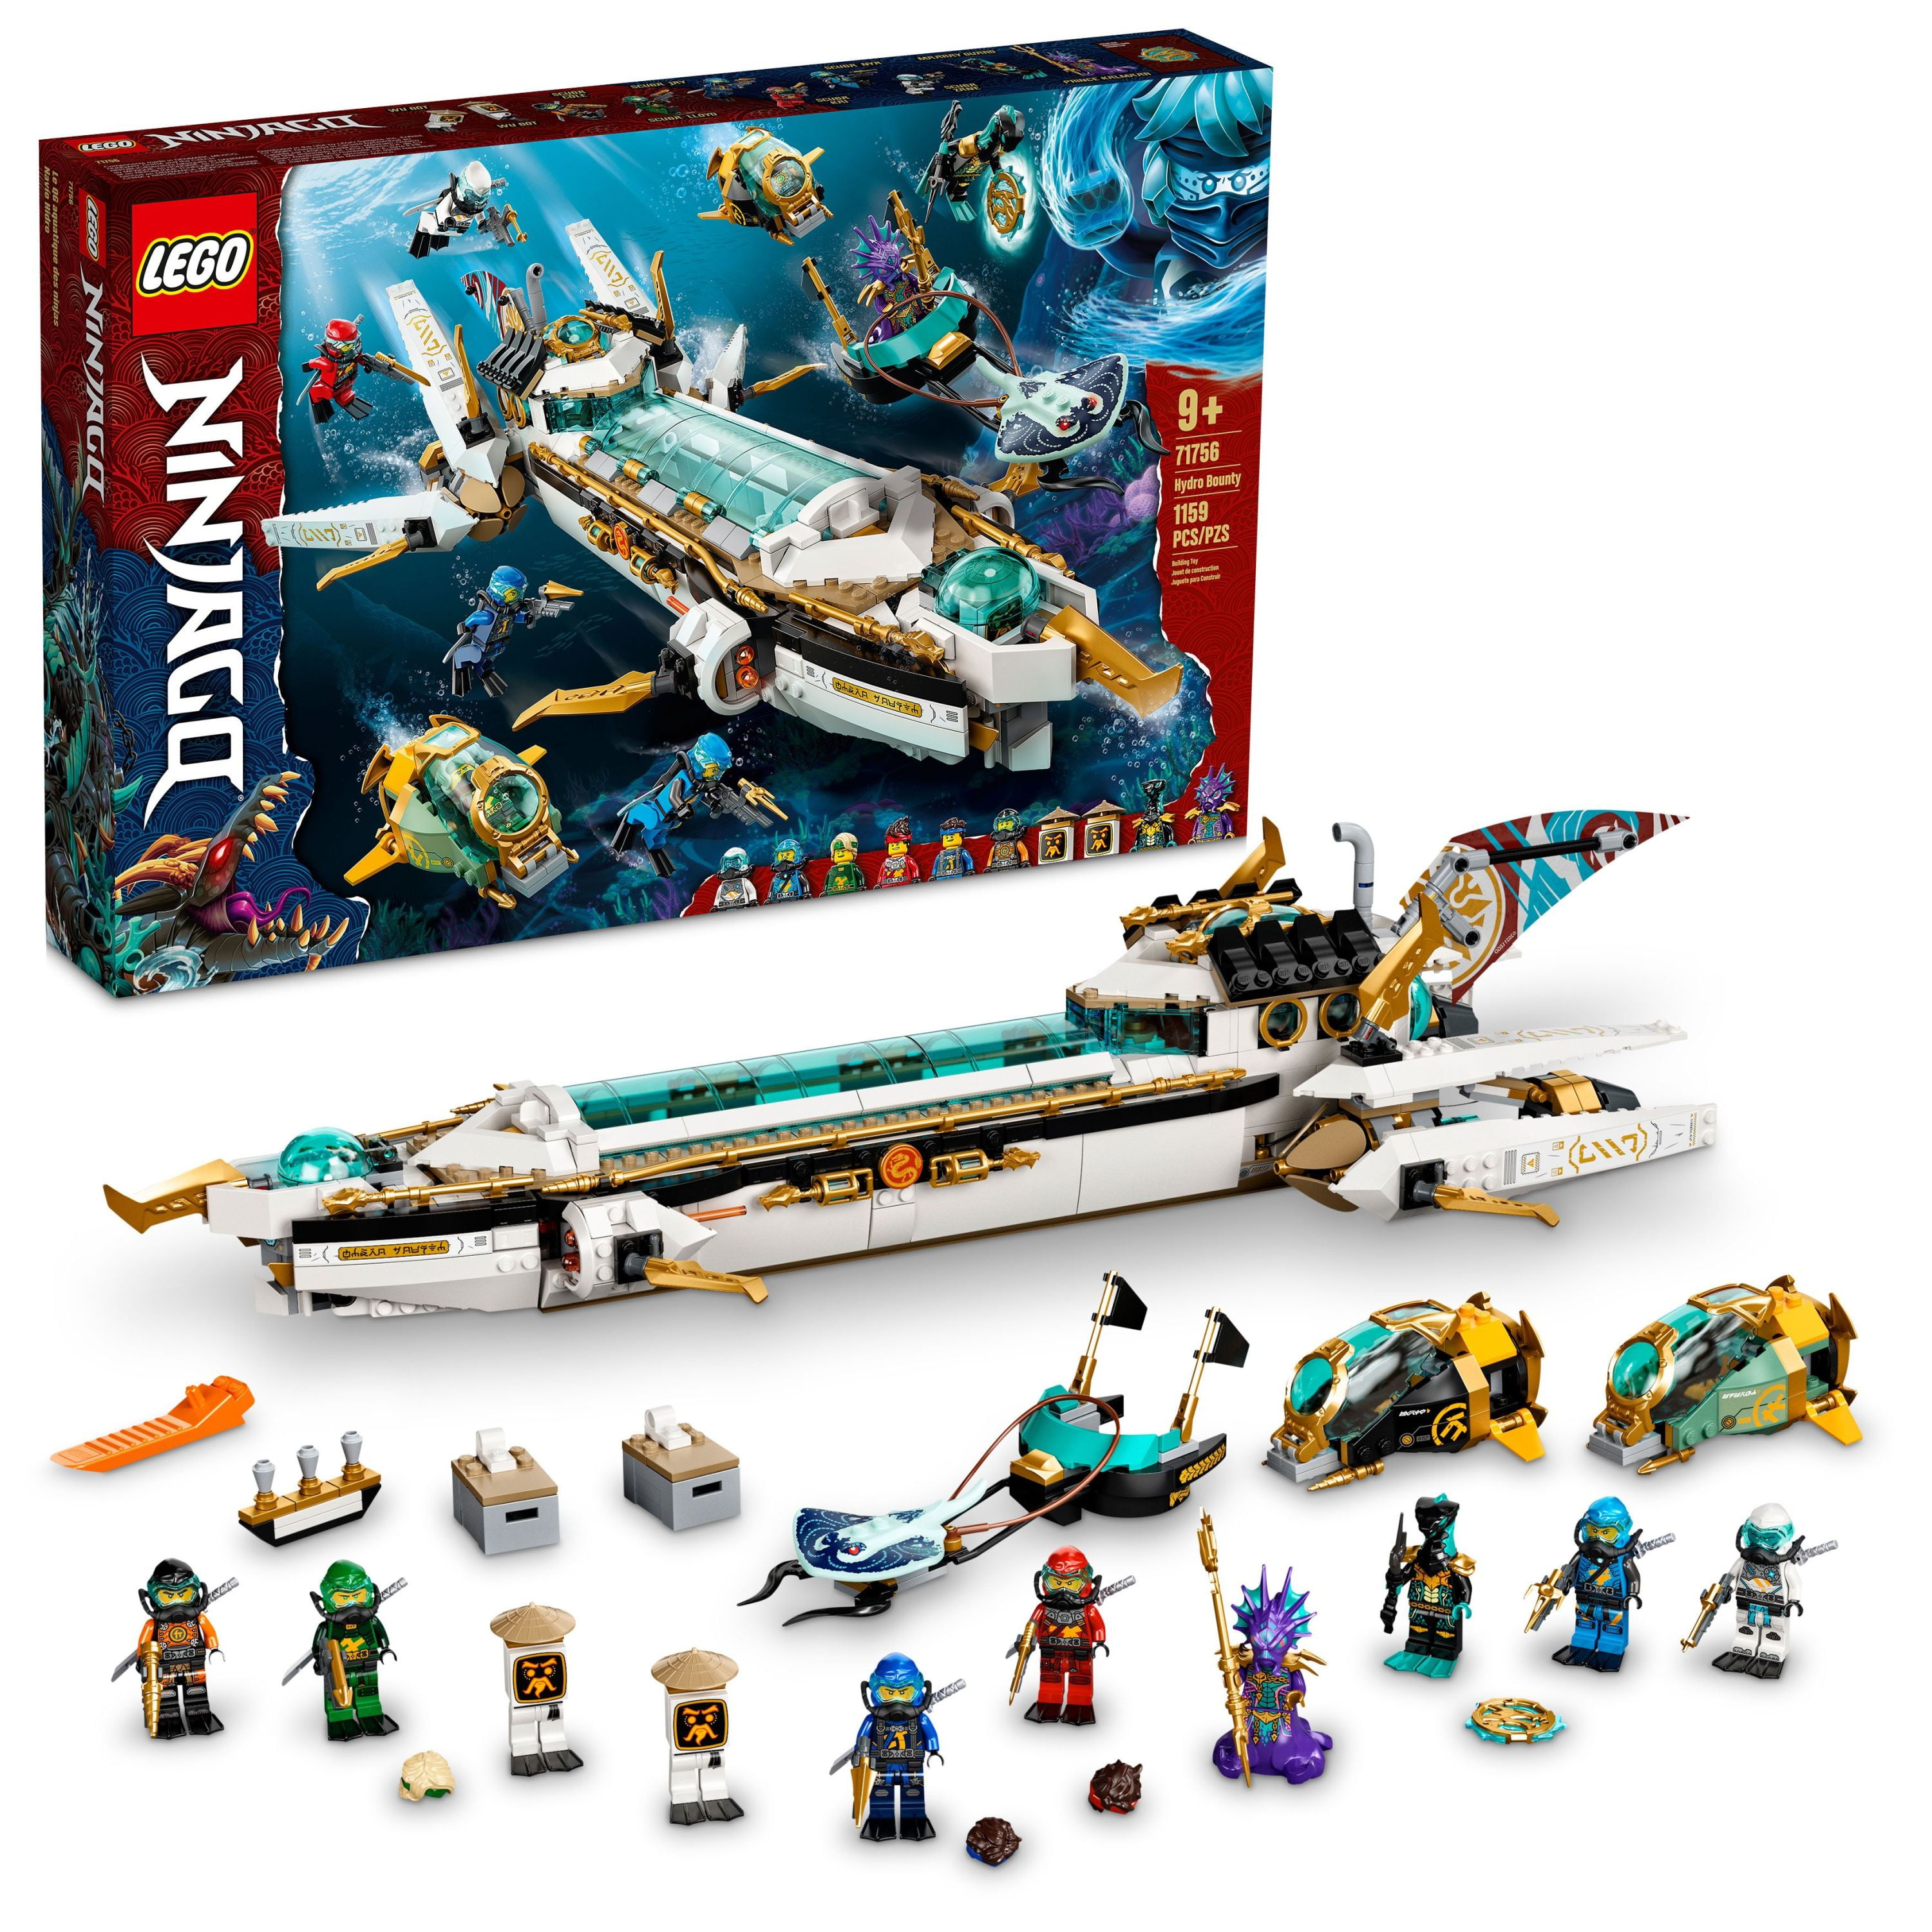 LEGO NINJAGO Hydro Bounty Building Set, 71756 Submarine Toy with Kai and Nya Toys, Gifts, Presents for Kids, Boys, Girls Age 9 Years Old - Walmart.com